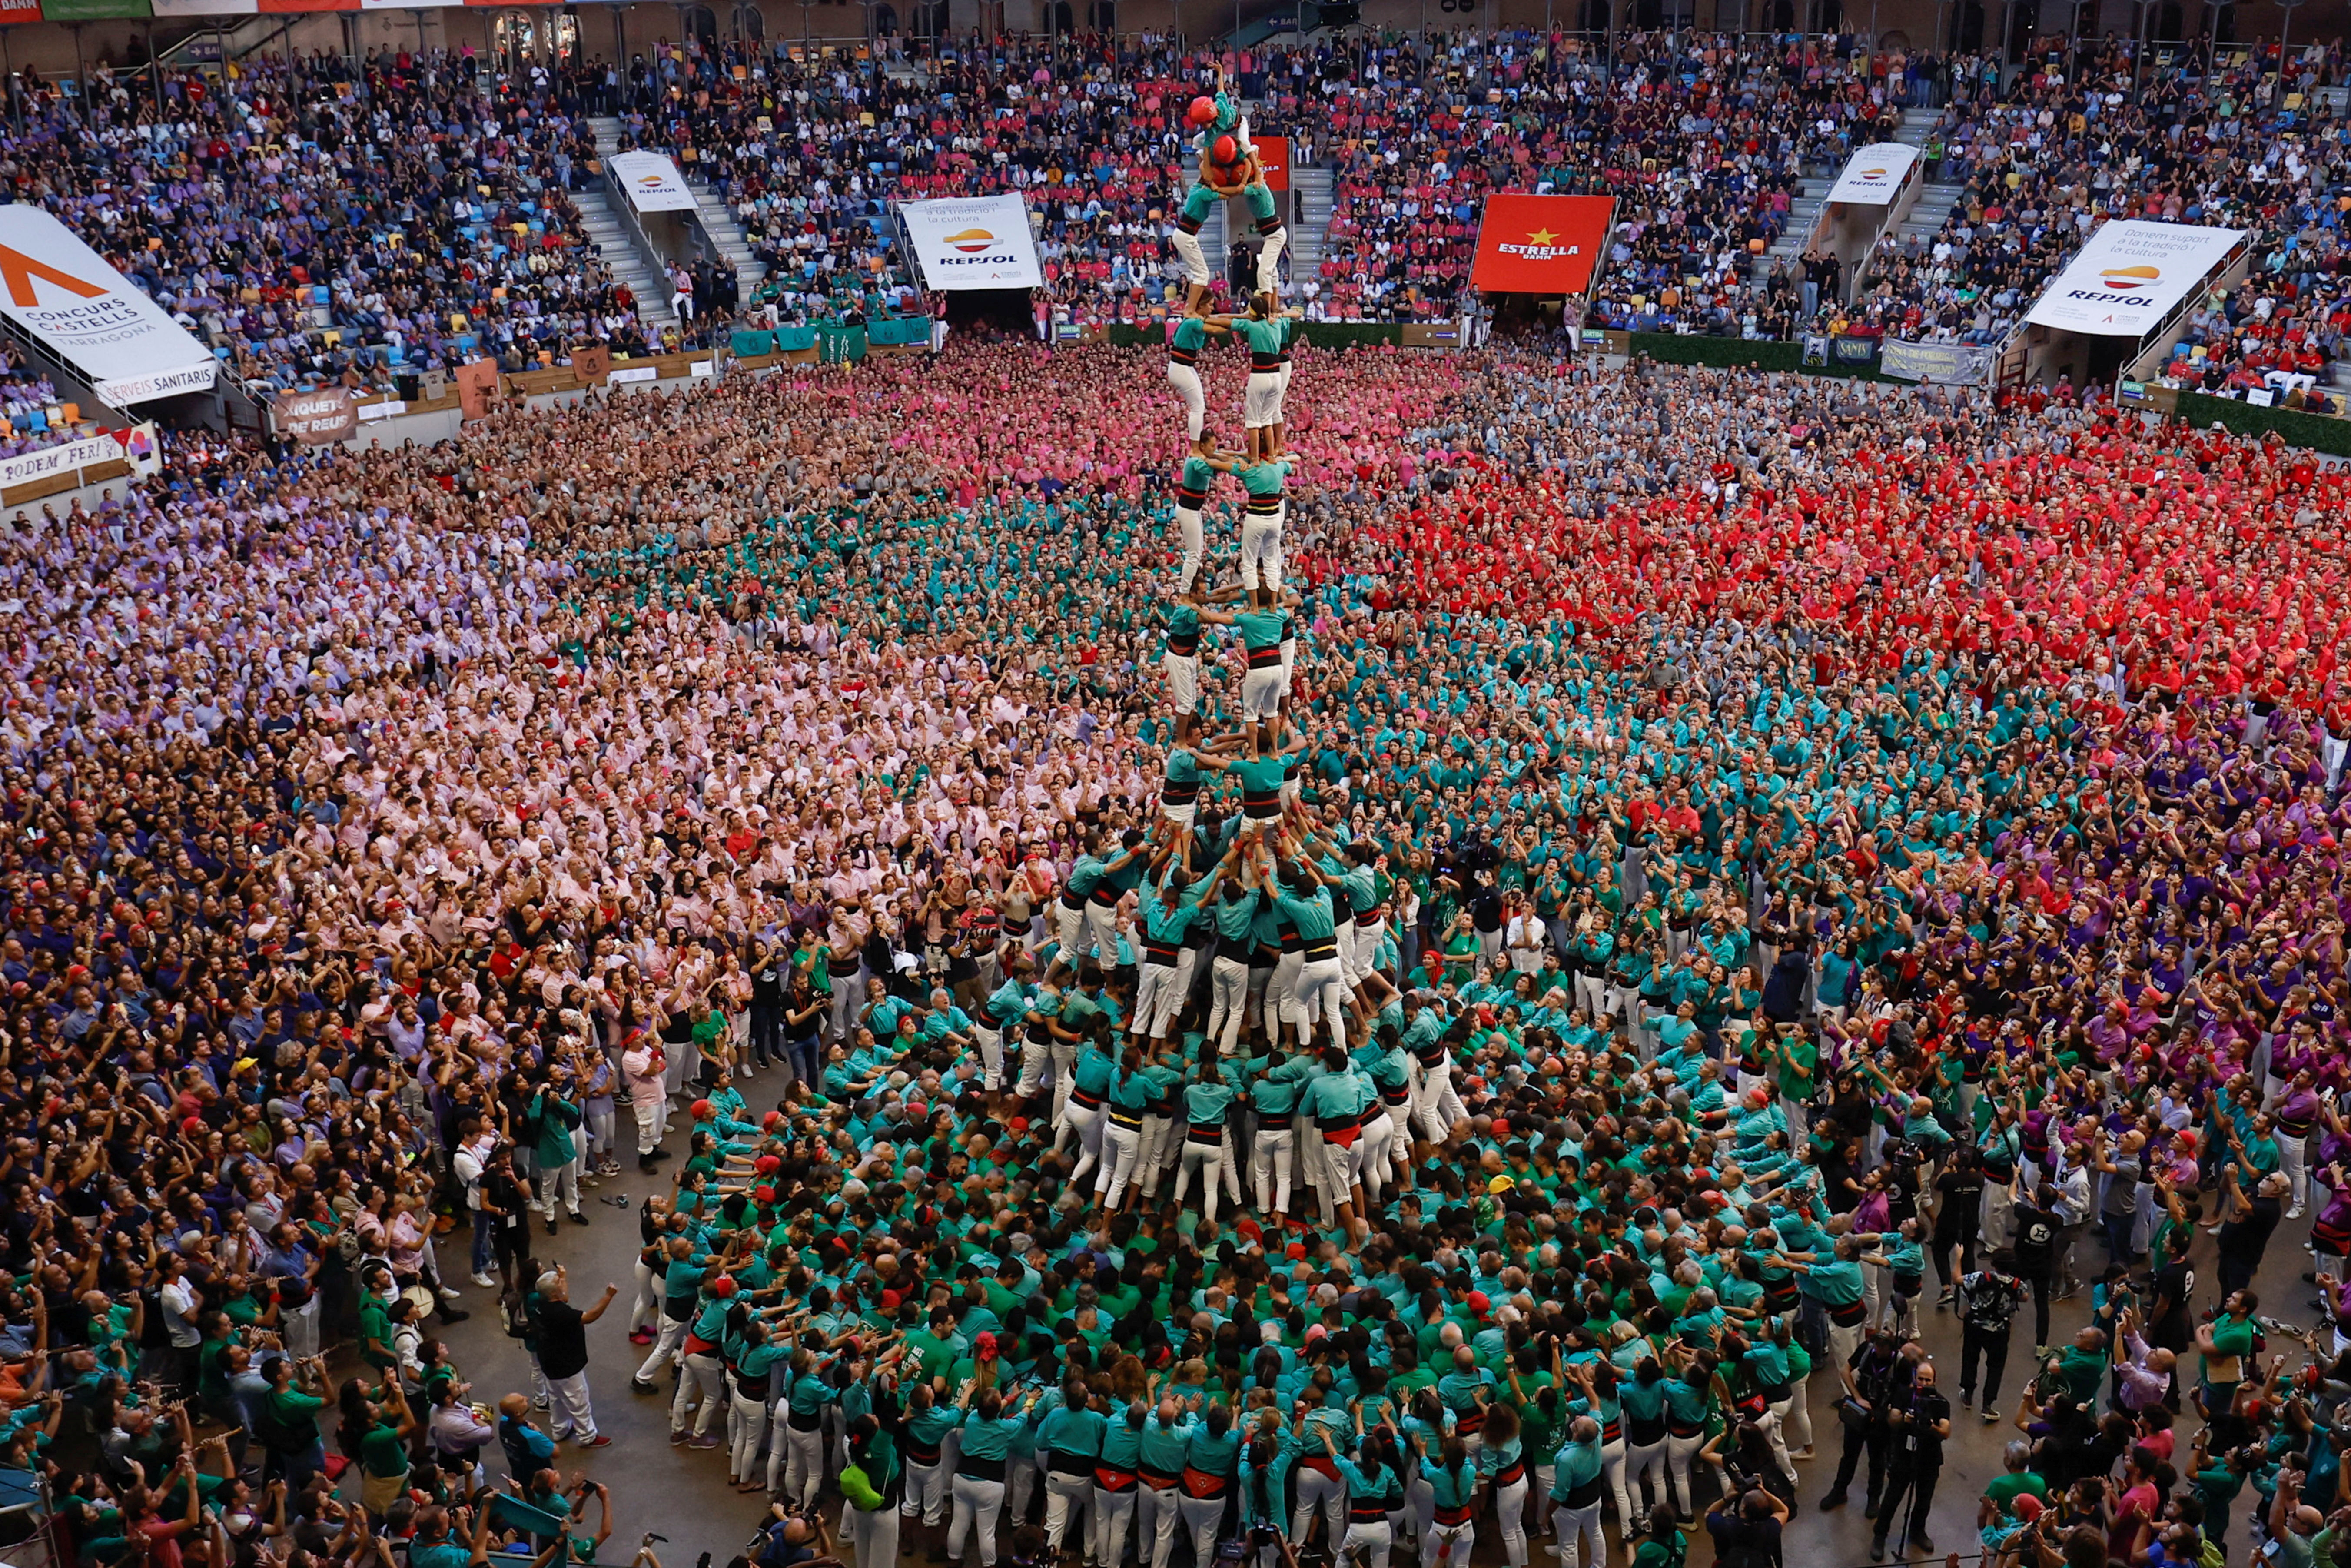 Biannual human tower competition in Tarragona